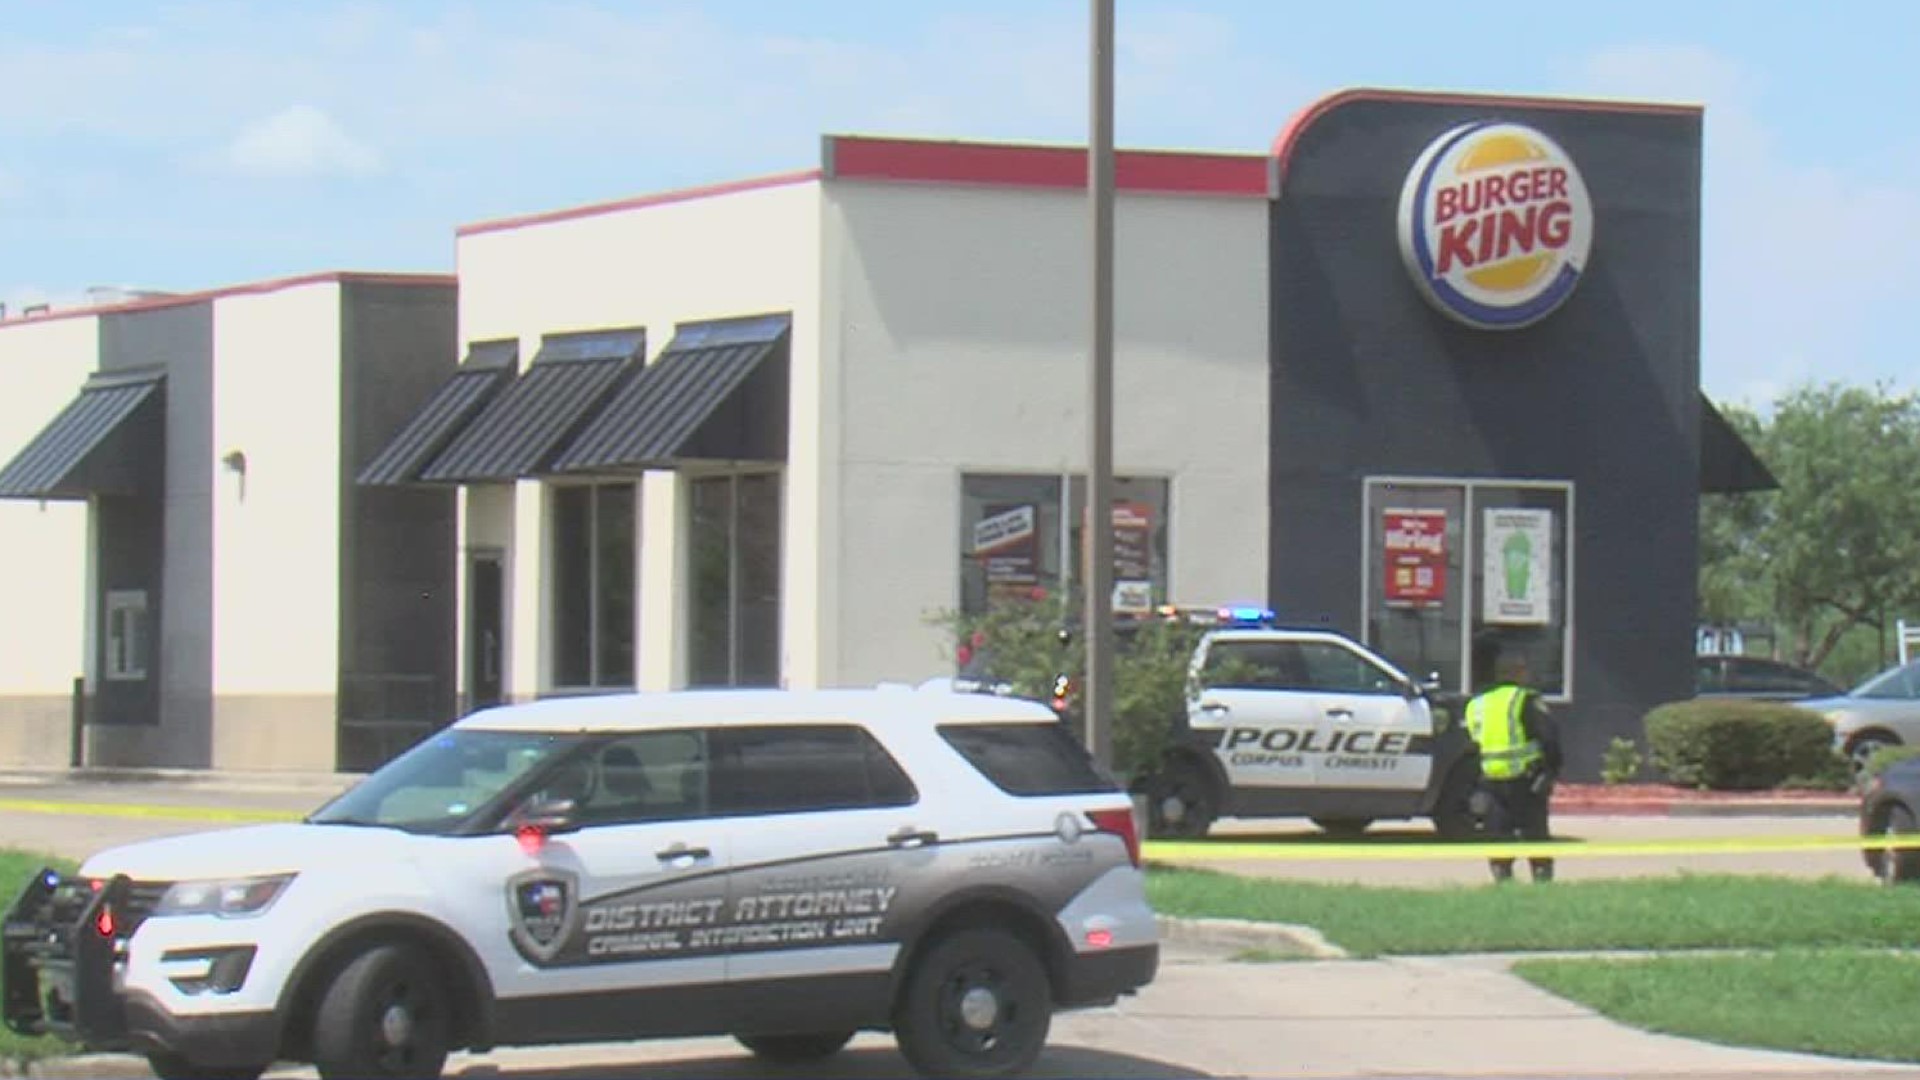 Officers with the Corpus Christi Police Department were called to the Burger King just after 1 p.m. for a call of a shooting with multiple victims.